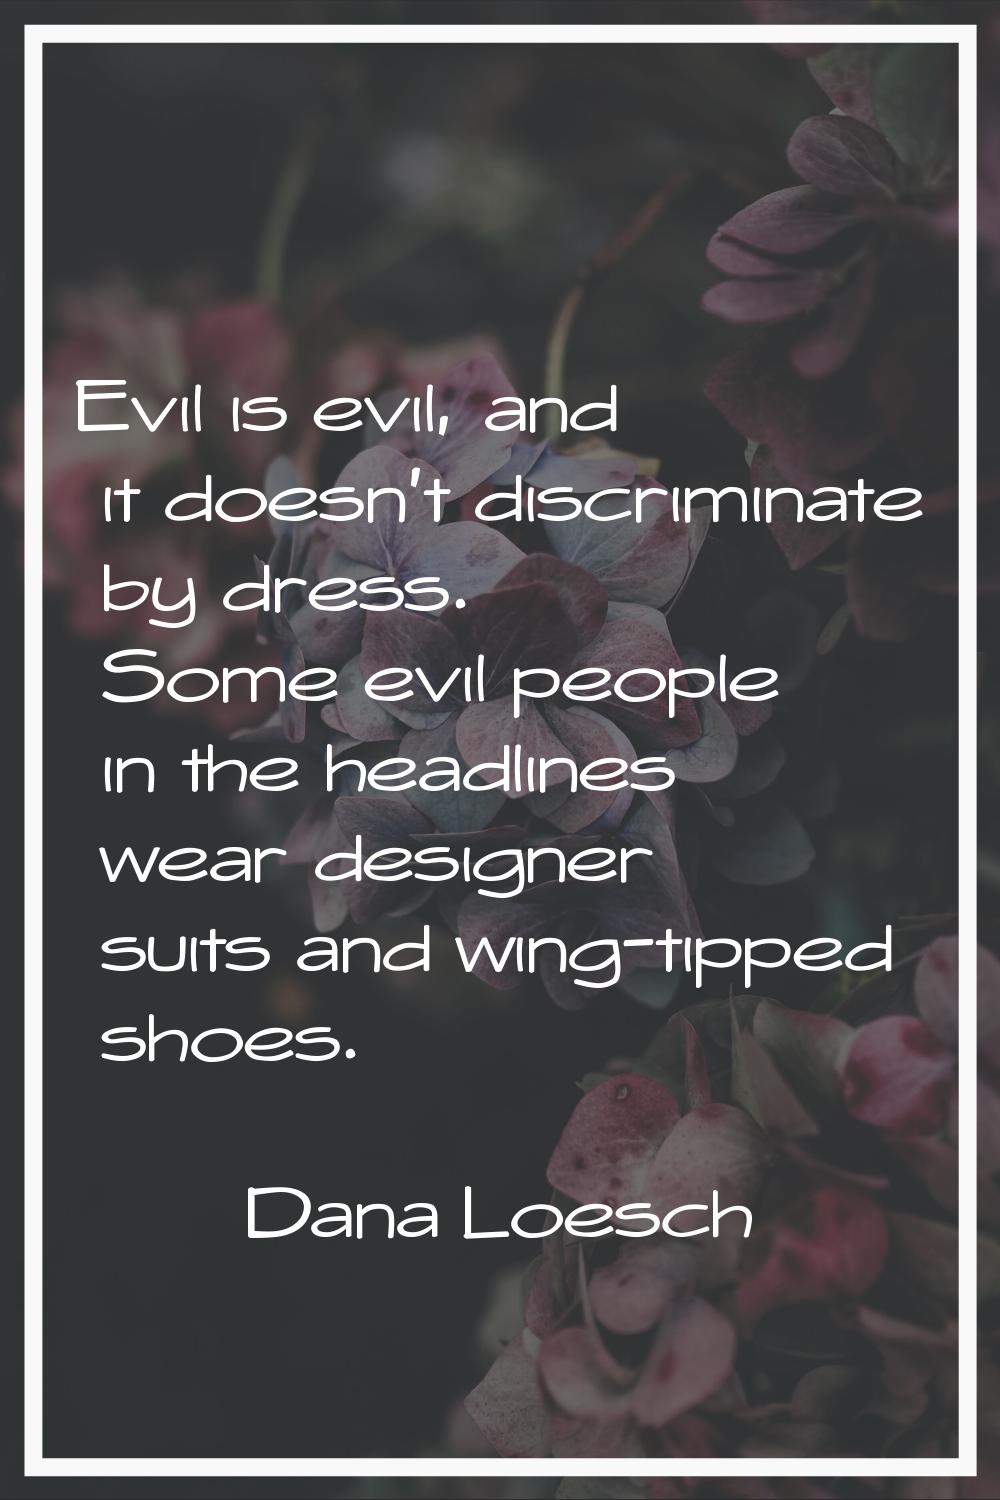 Evil is evil, and it doesn't discriminate by dress. Some evil people in the headlines wear designer